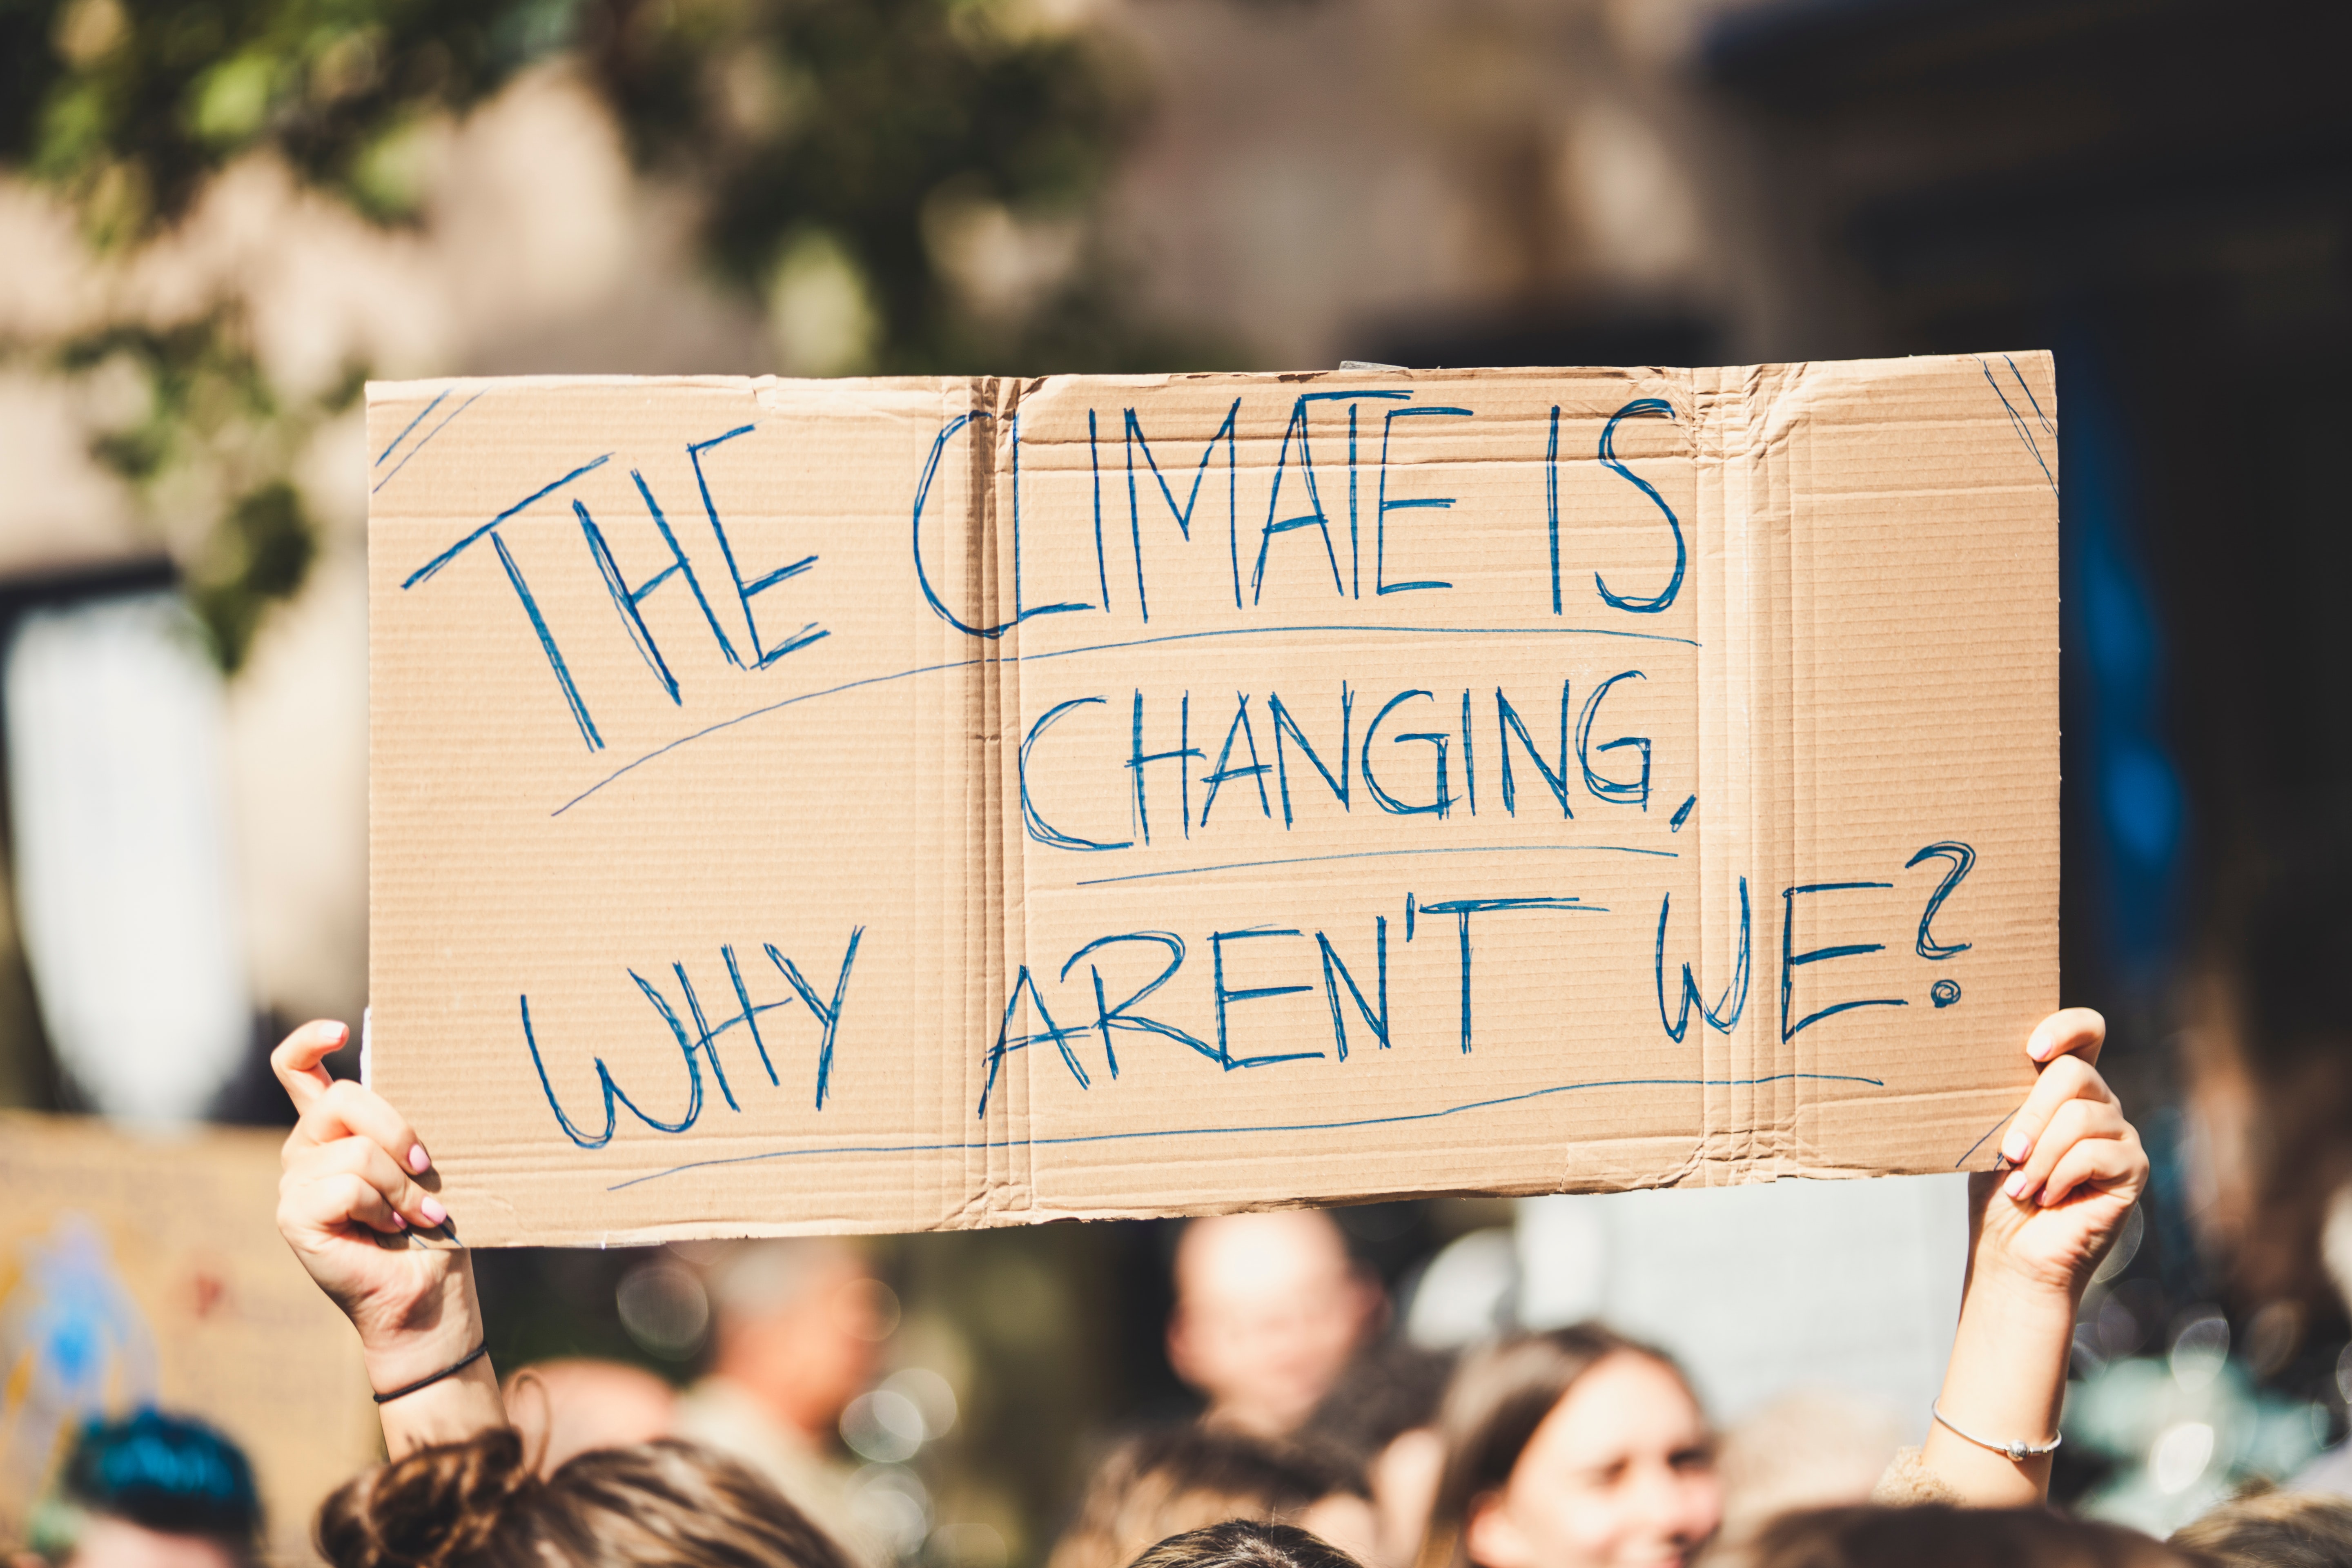 A cardboard sign that reads "The climate is changing, why aren't we?"